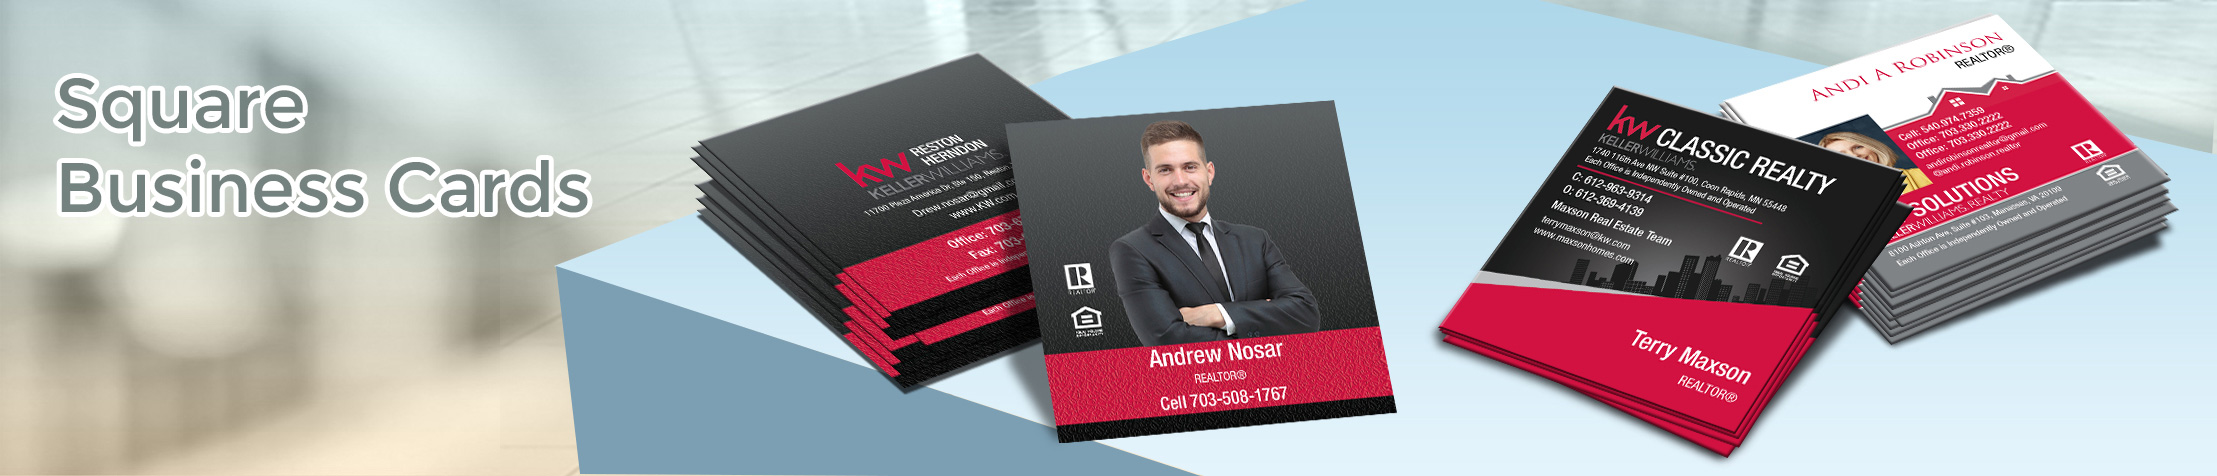 Keller Williams Real Estate Square Business Cards - KW Approved Vendor - Modern, Unique Business Cards for Realtors with a Glossy or Matte Finish | BestPrintBuy.com